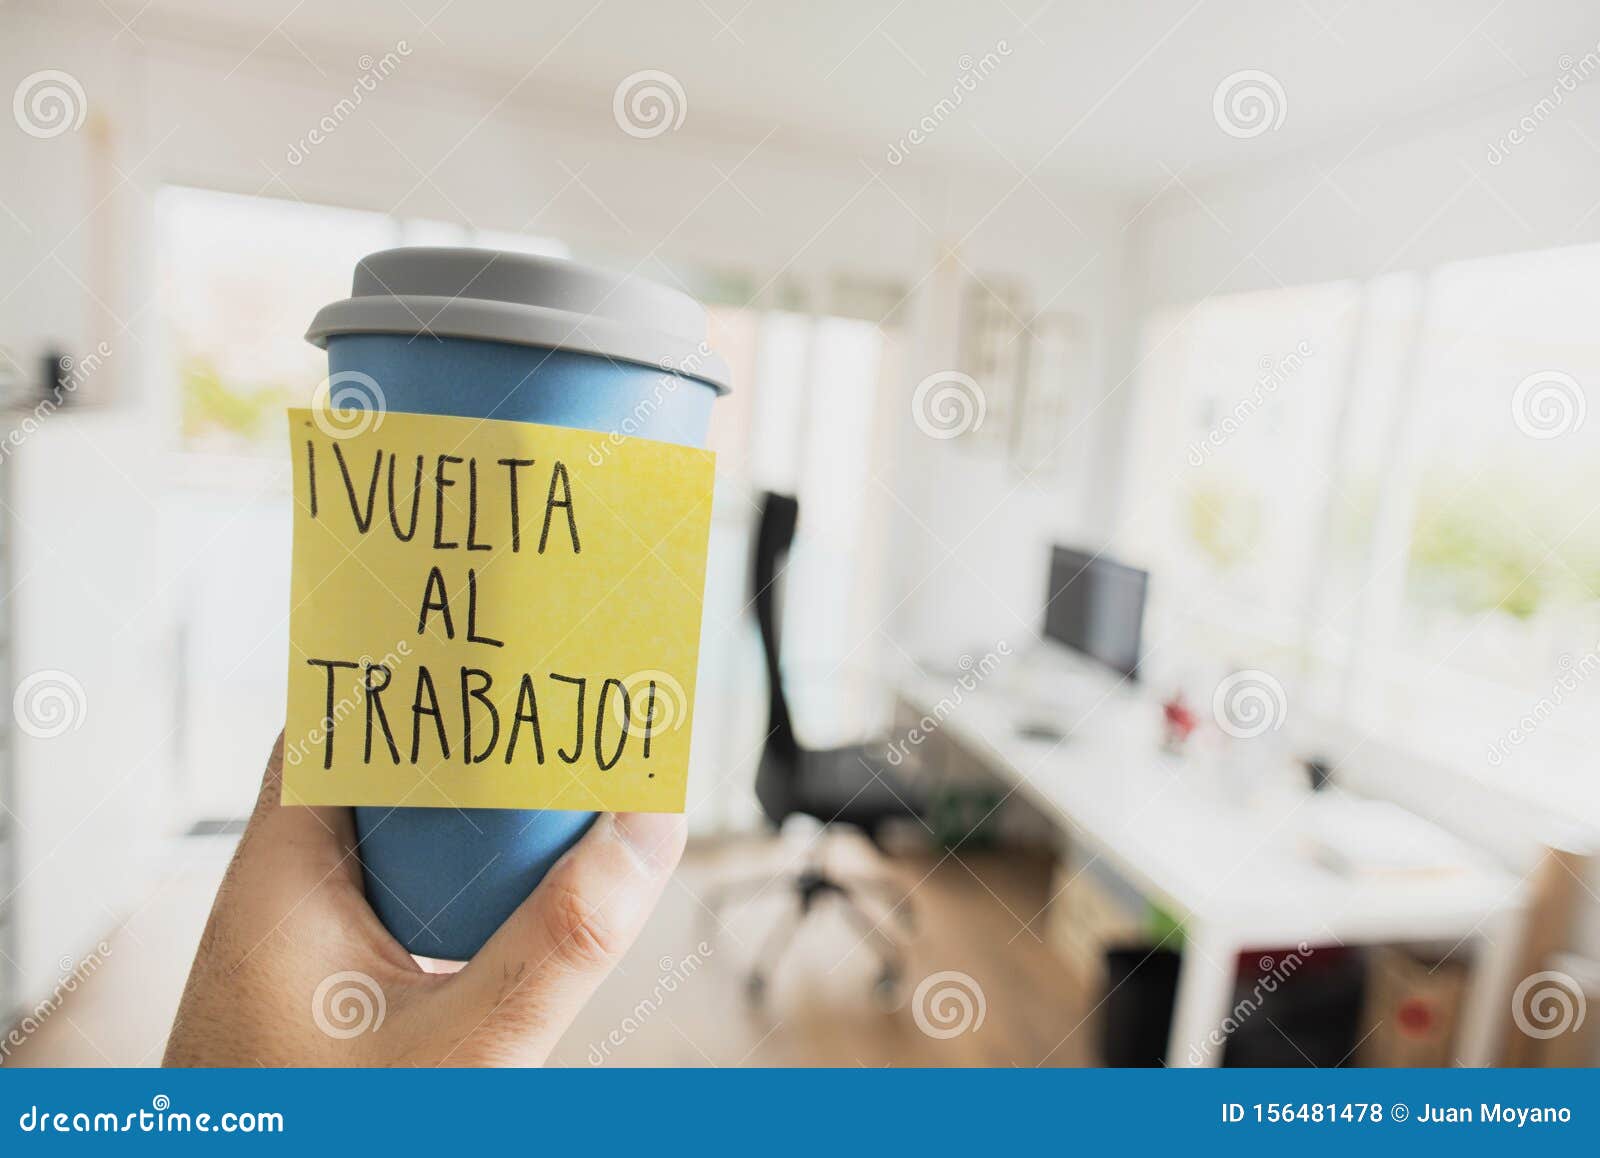 text back to work written in spanish